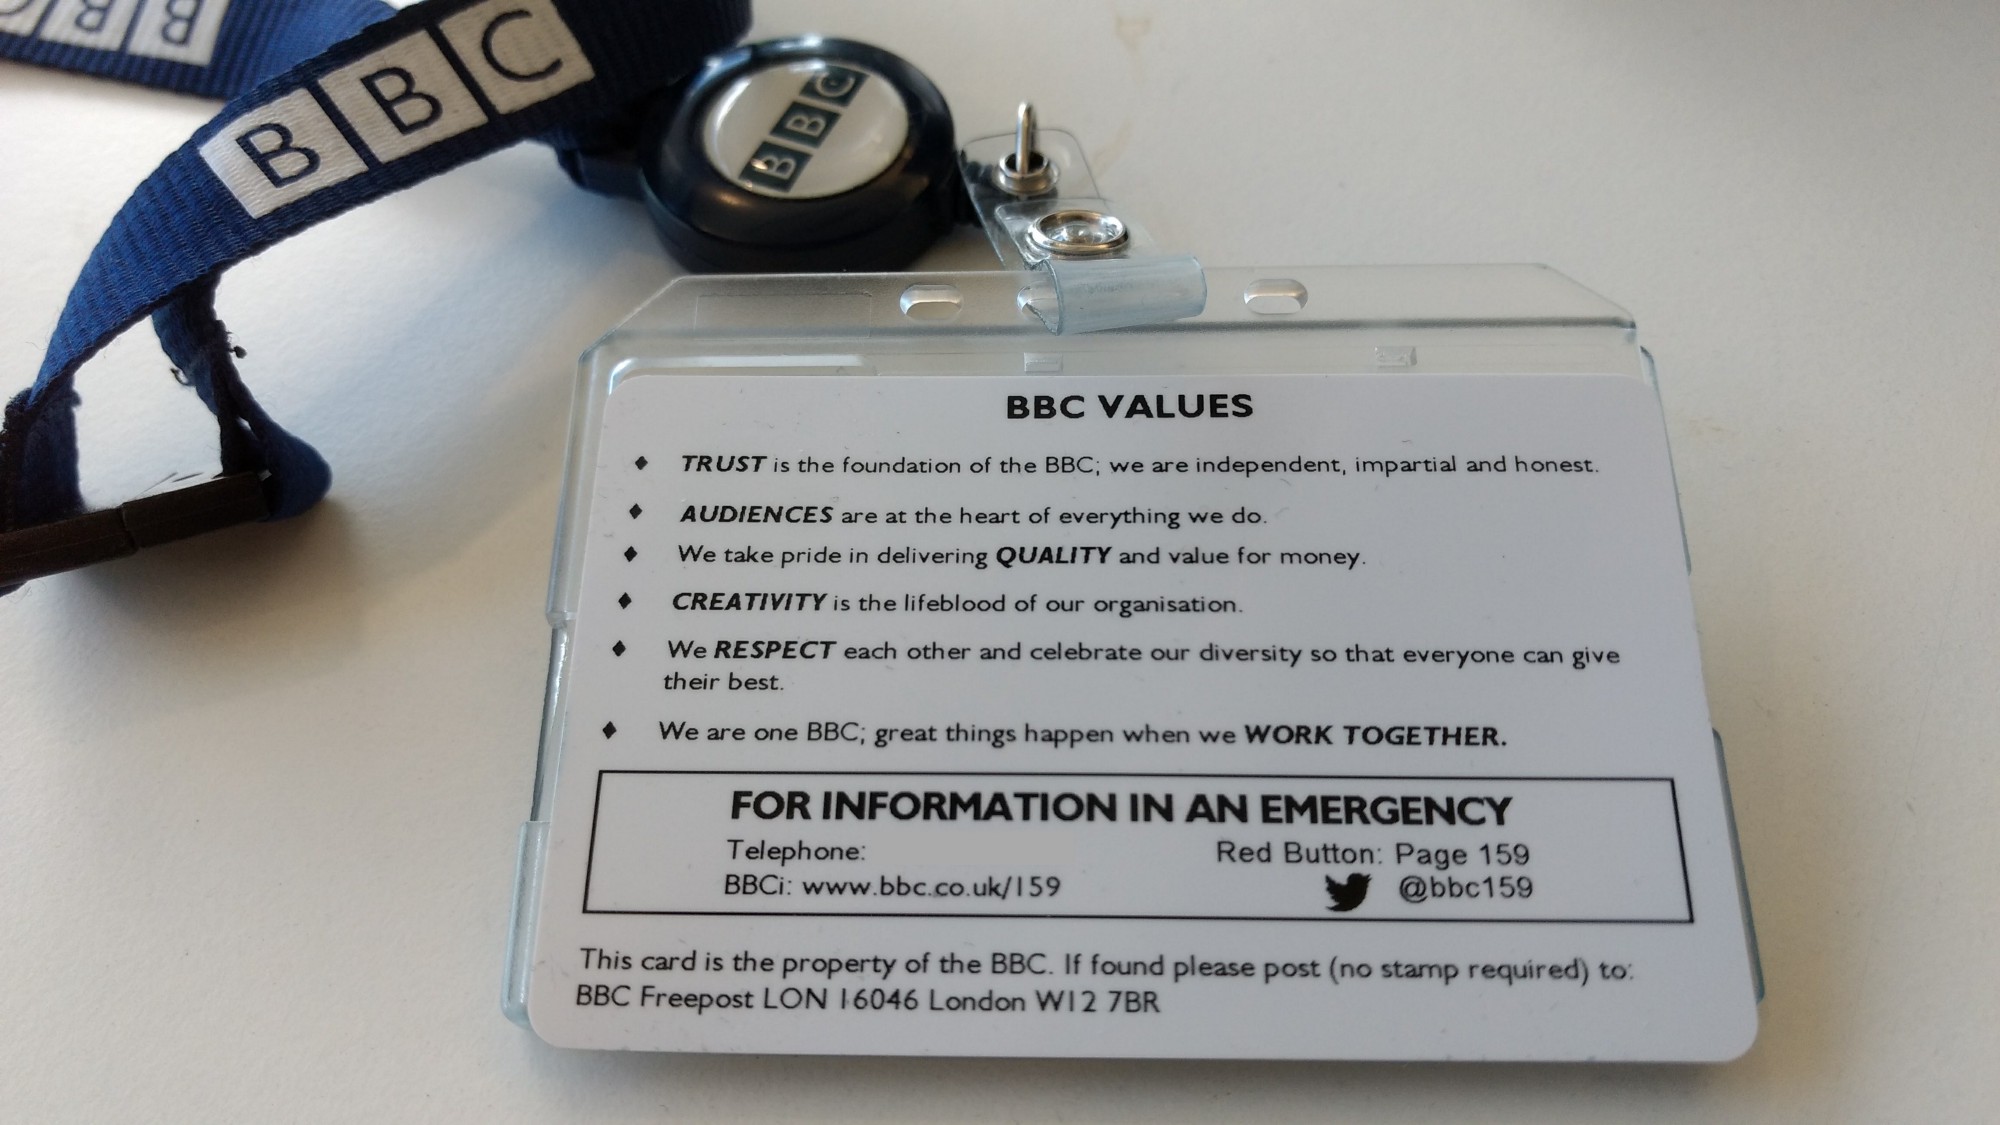 Reverse side of a BBC staff ID card listing the BBC's values.